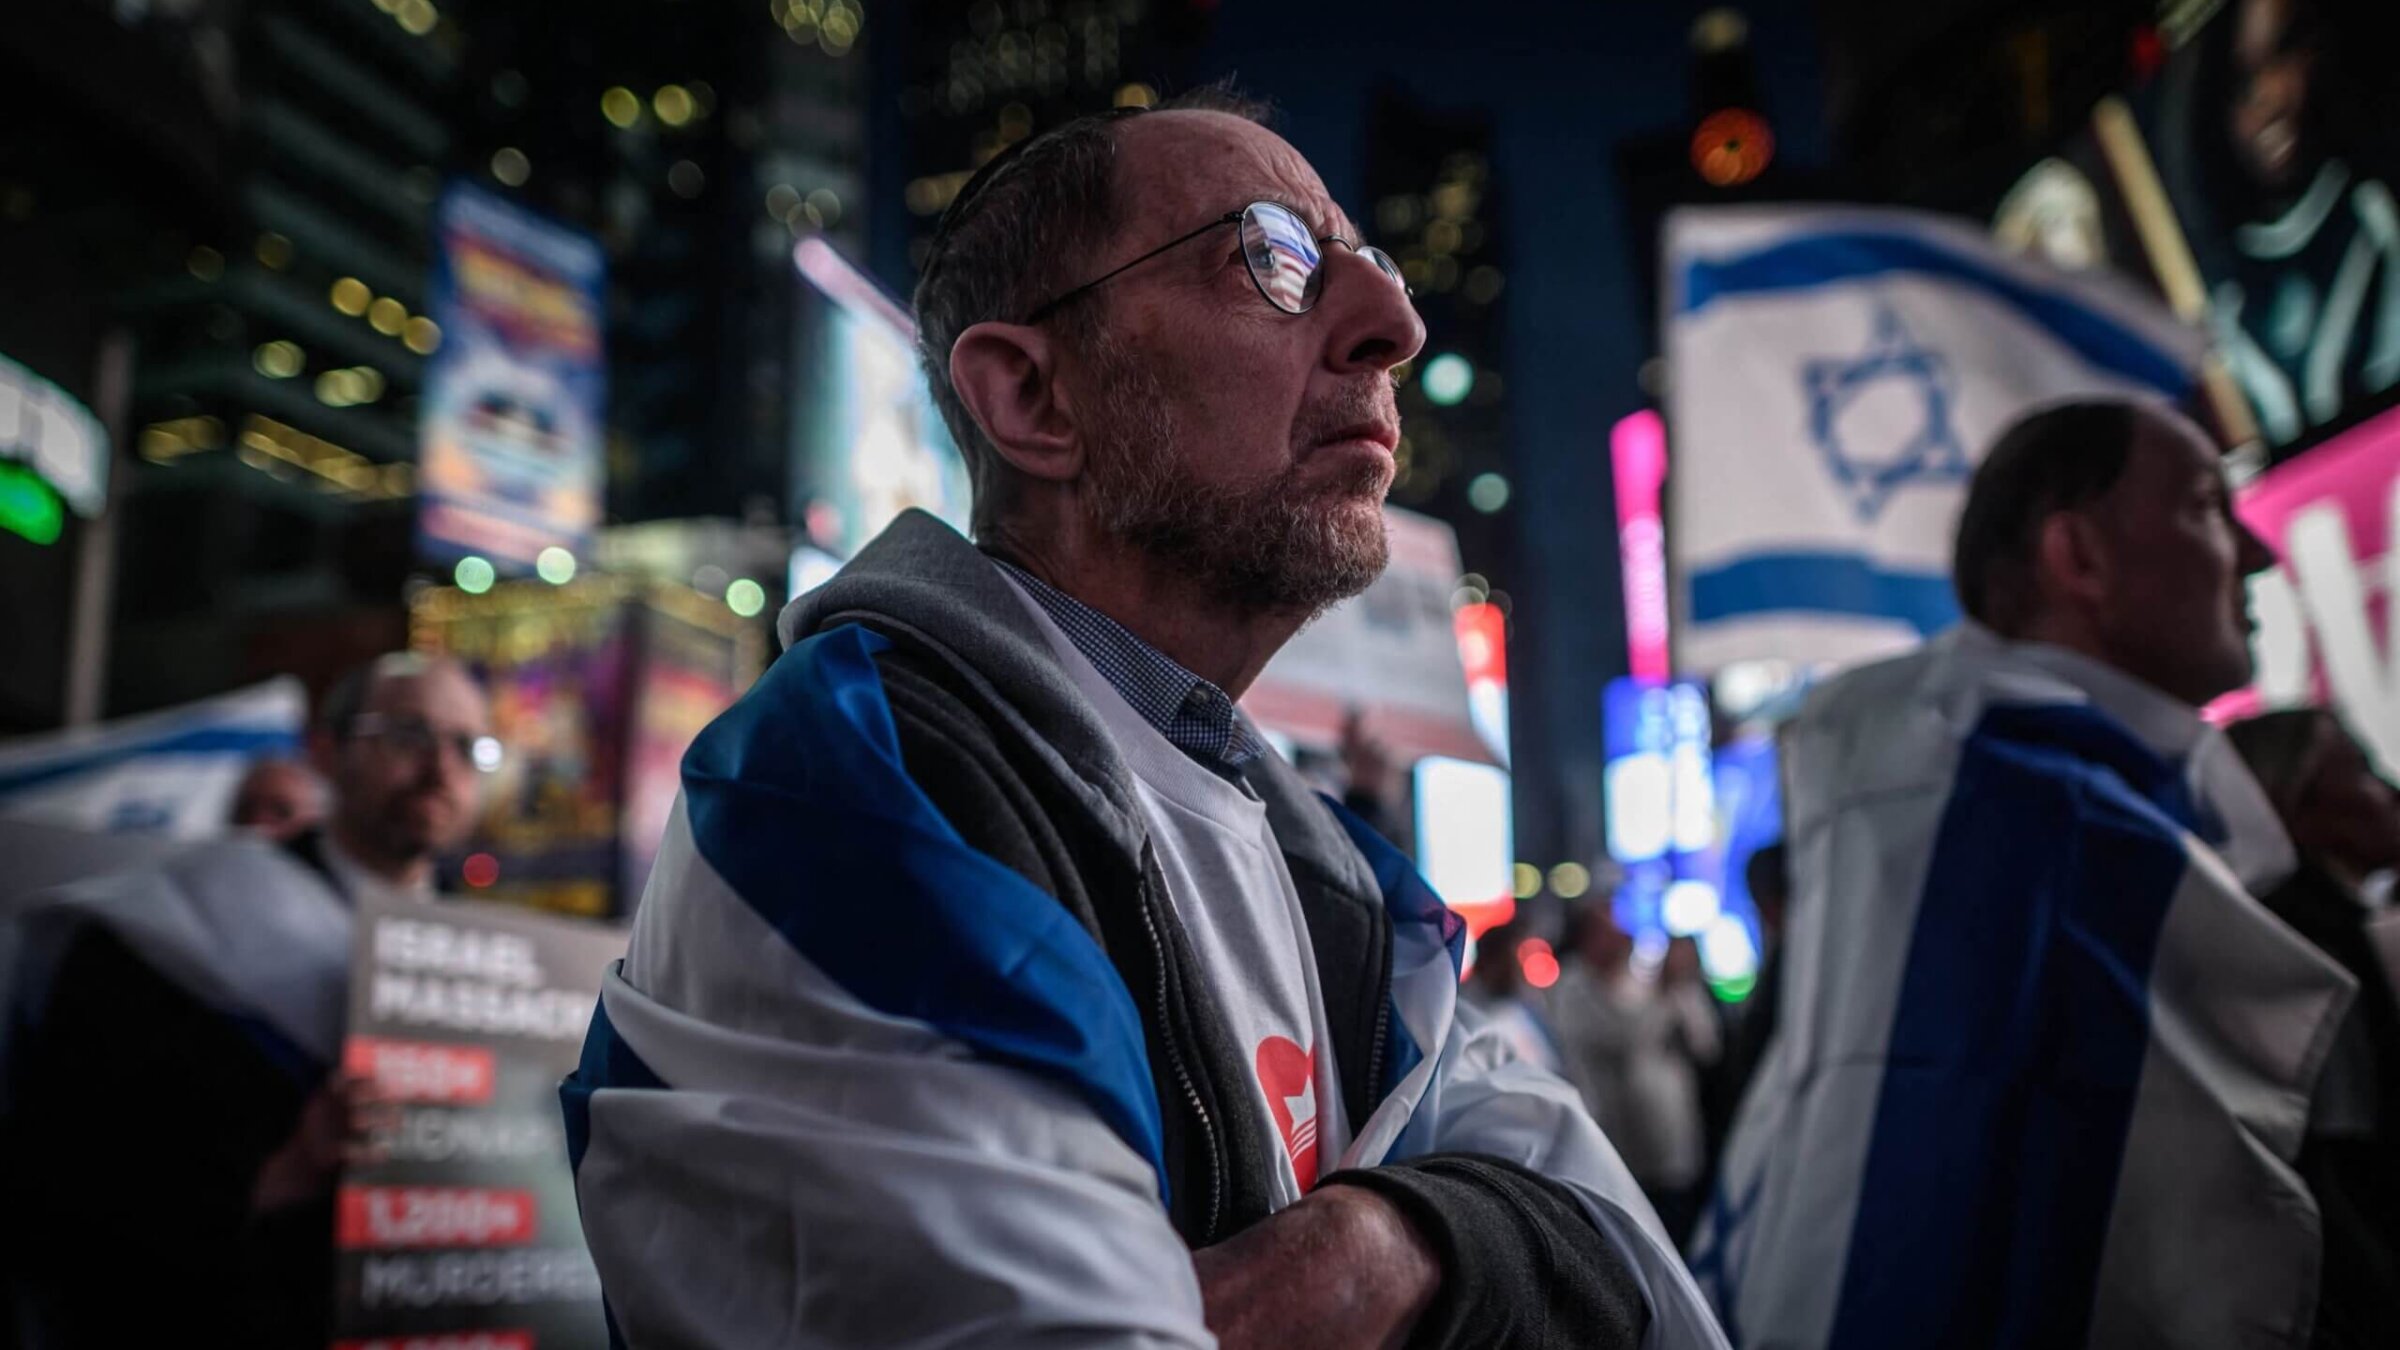 Supporters of Israel attended a Times Square rally calling for the release of hostages held by Hamas last week.